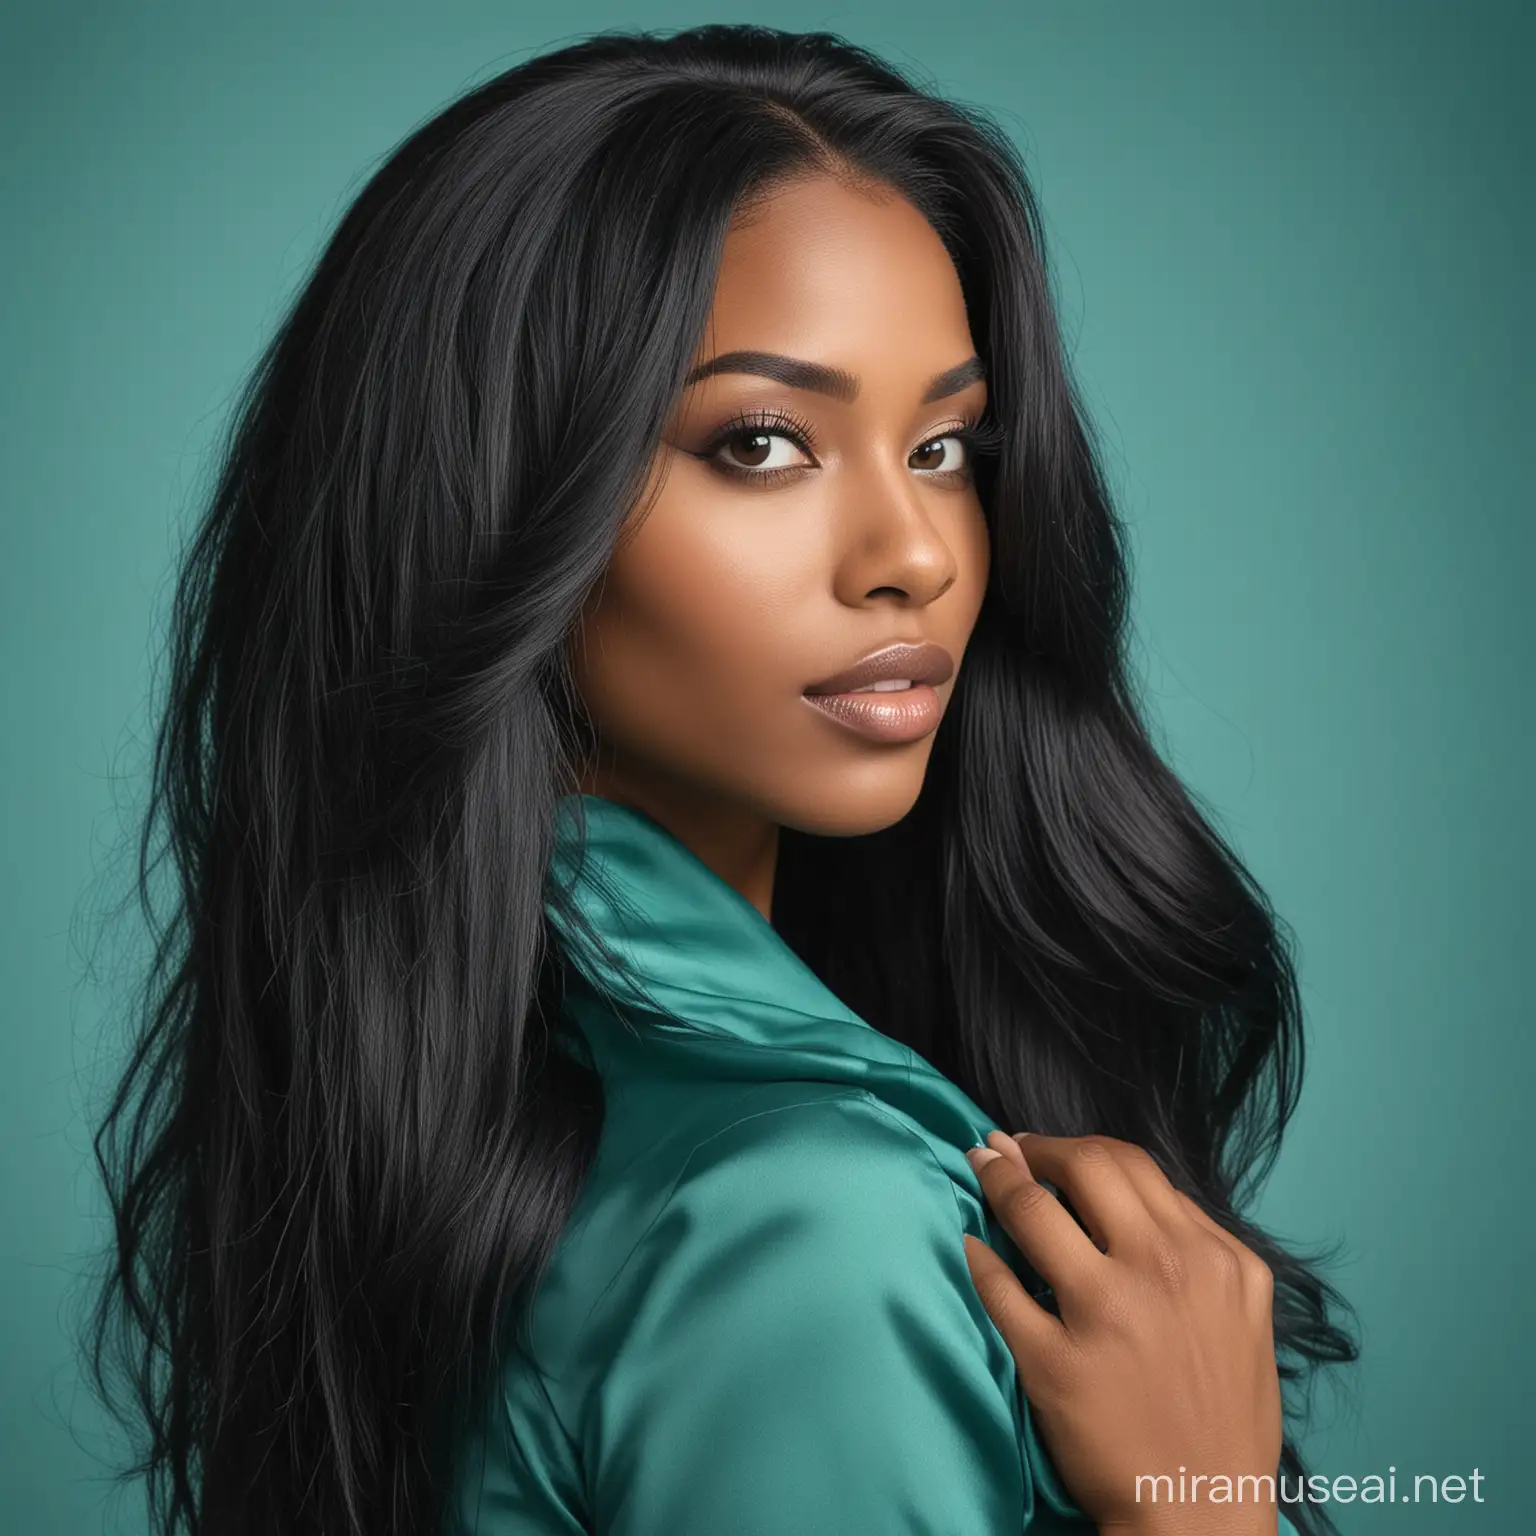 Elegant Black Woman with Silky Hair on Teal Background